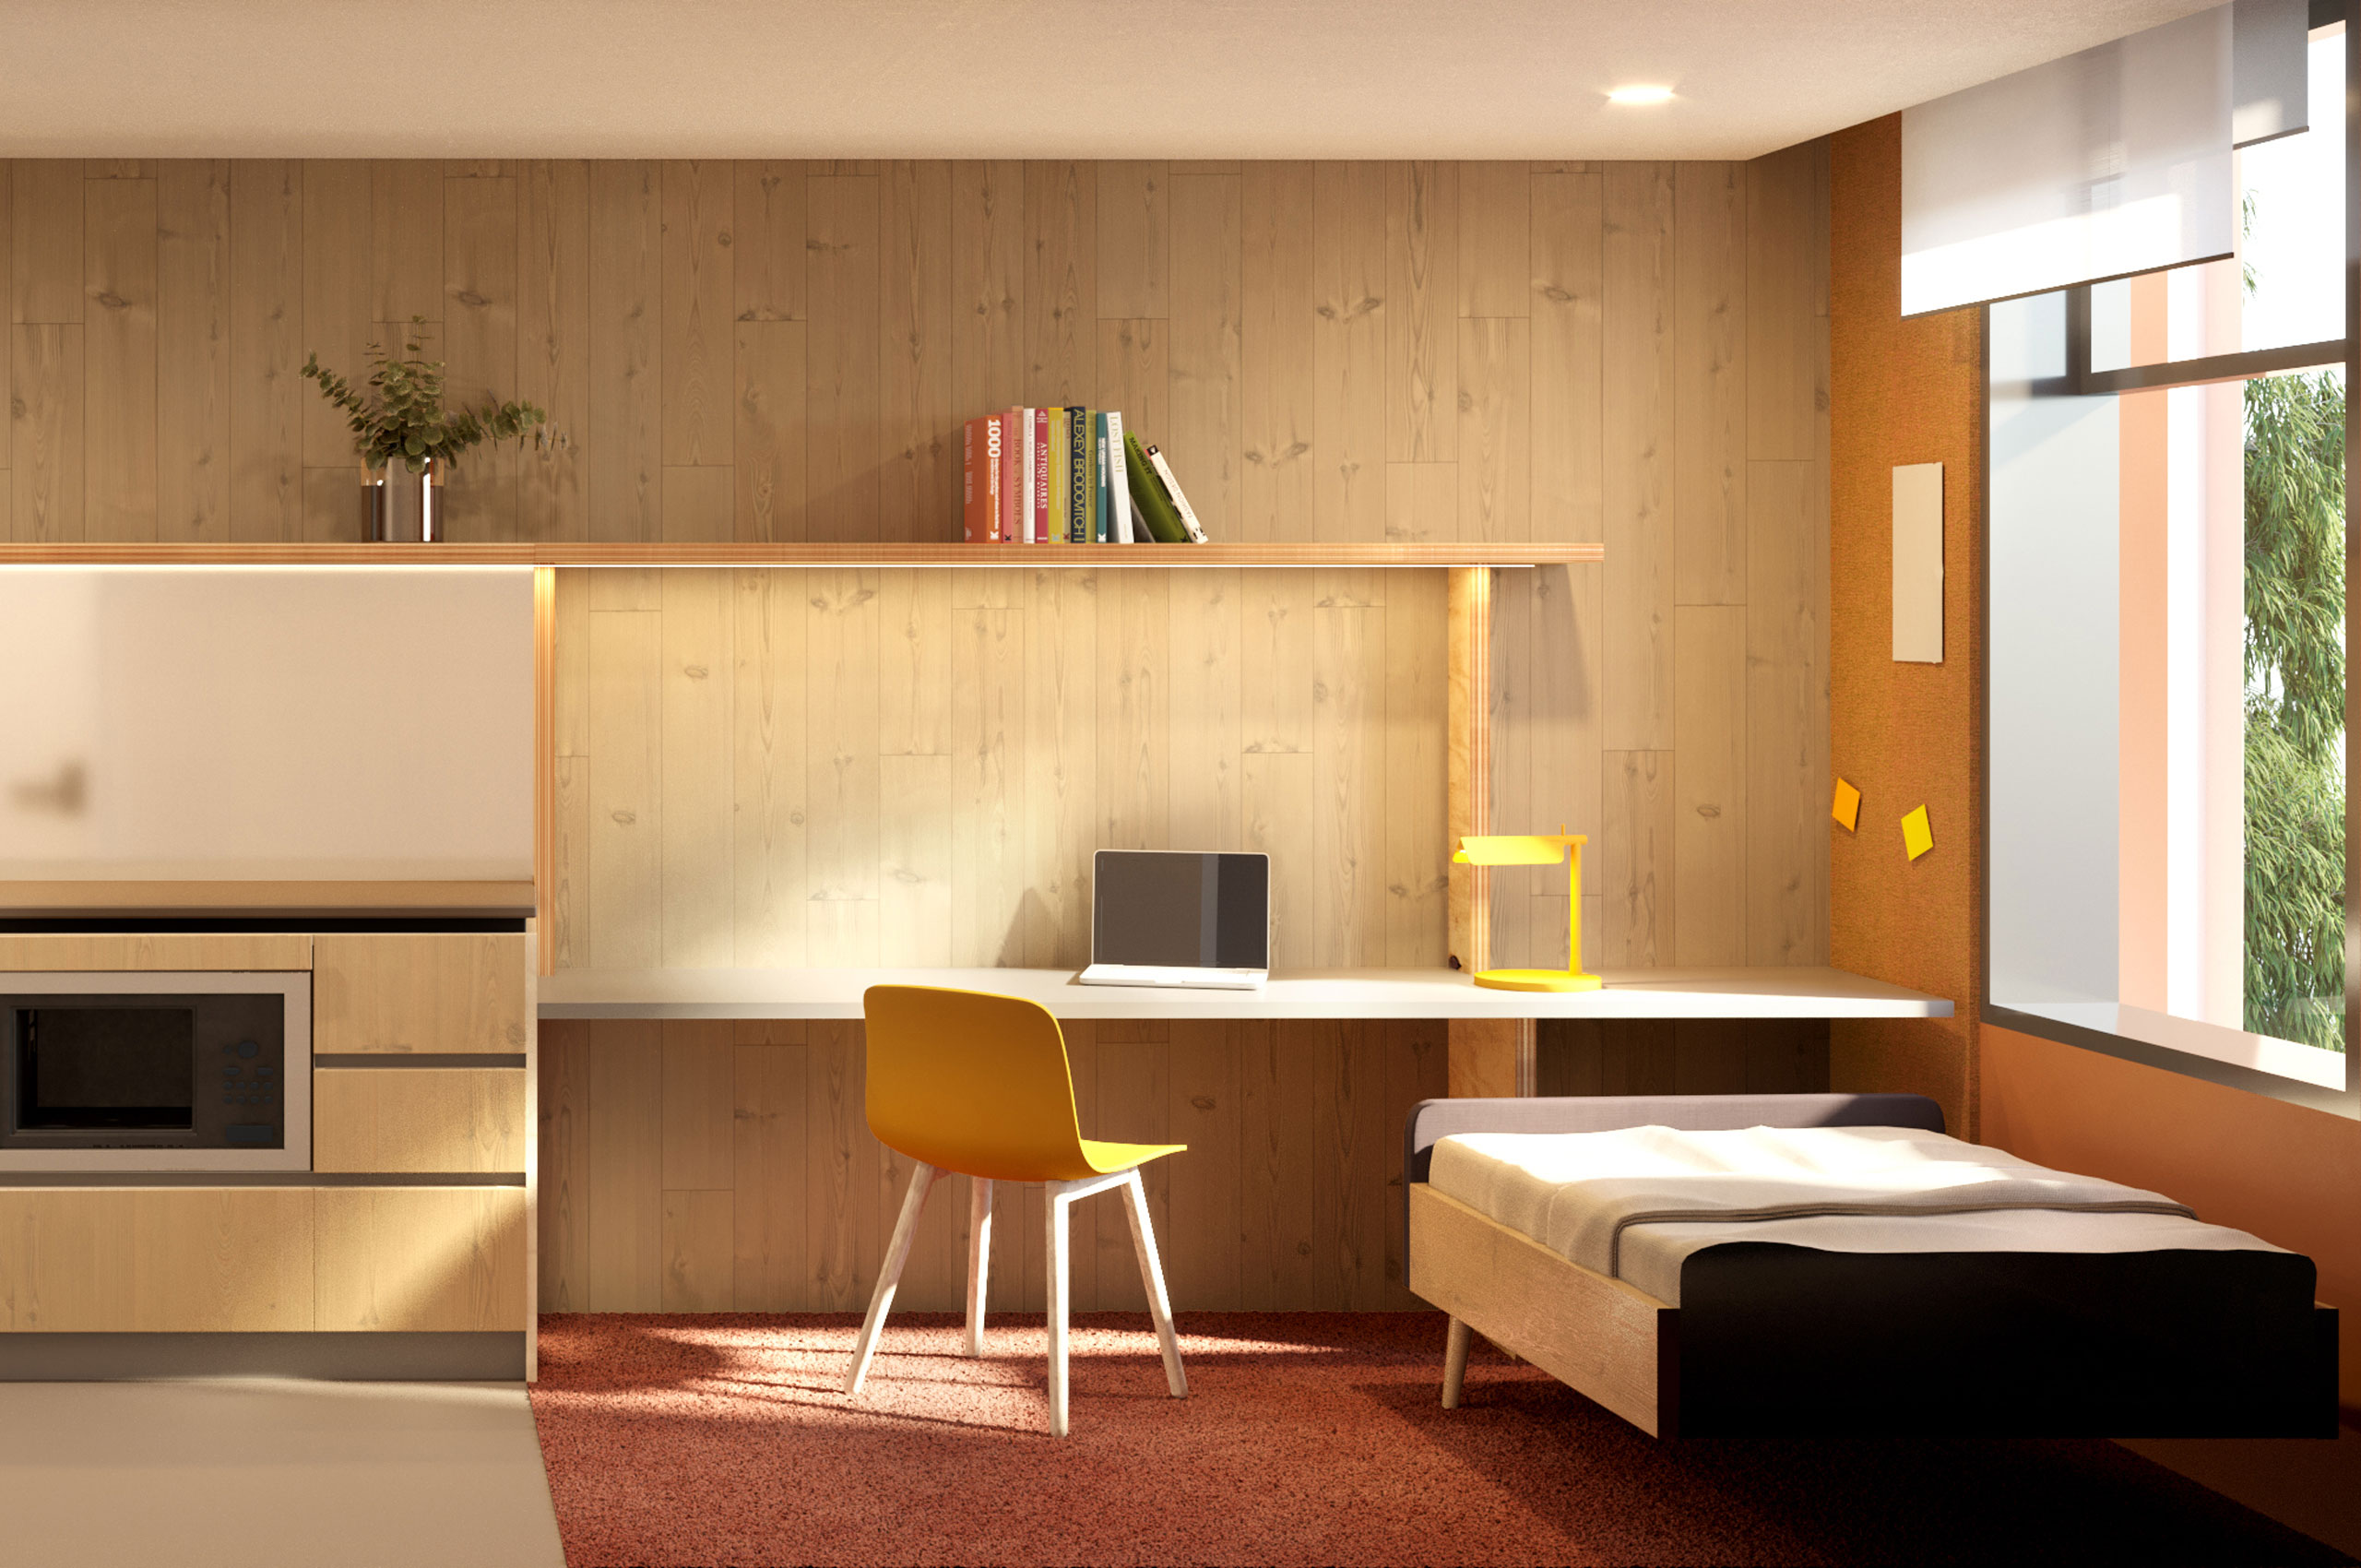 Concept art of single apartment study area and king single bed. [Architect: Jackson Clement Burrows.]